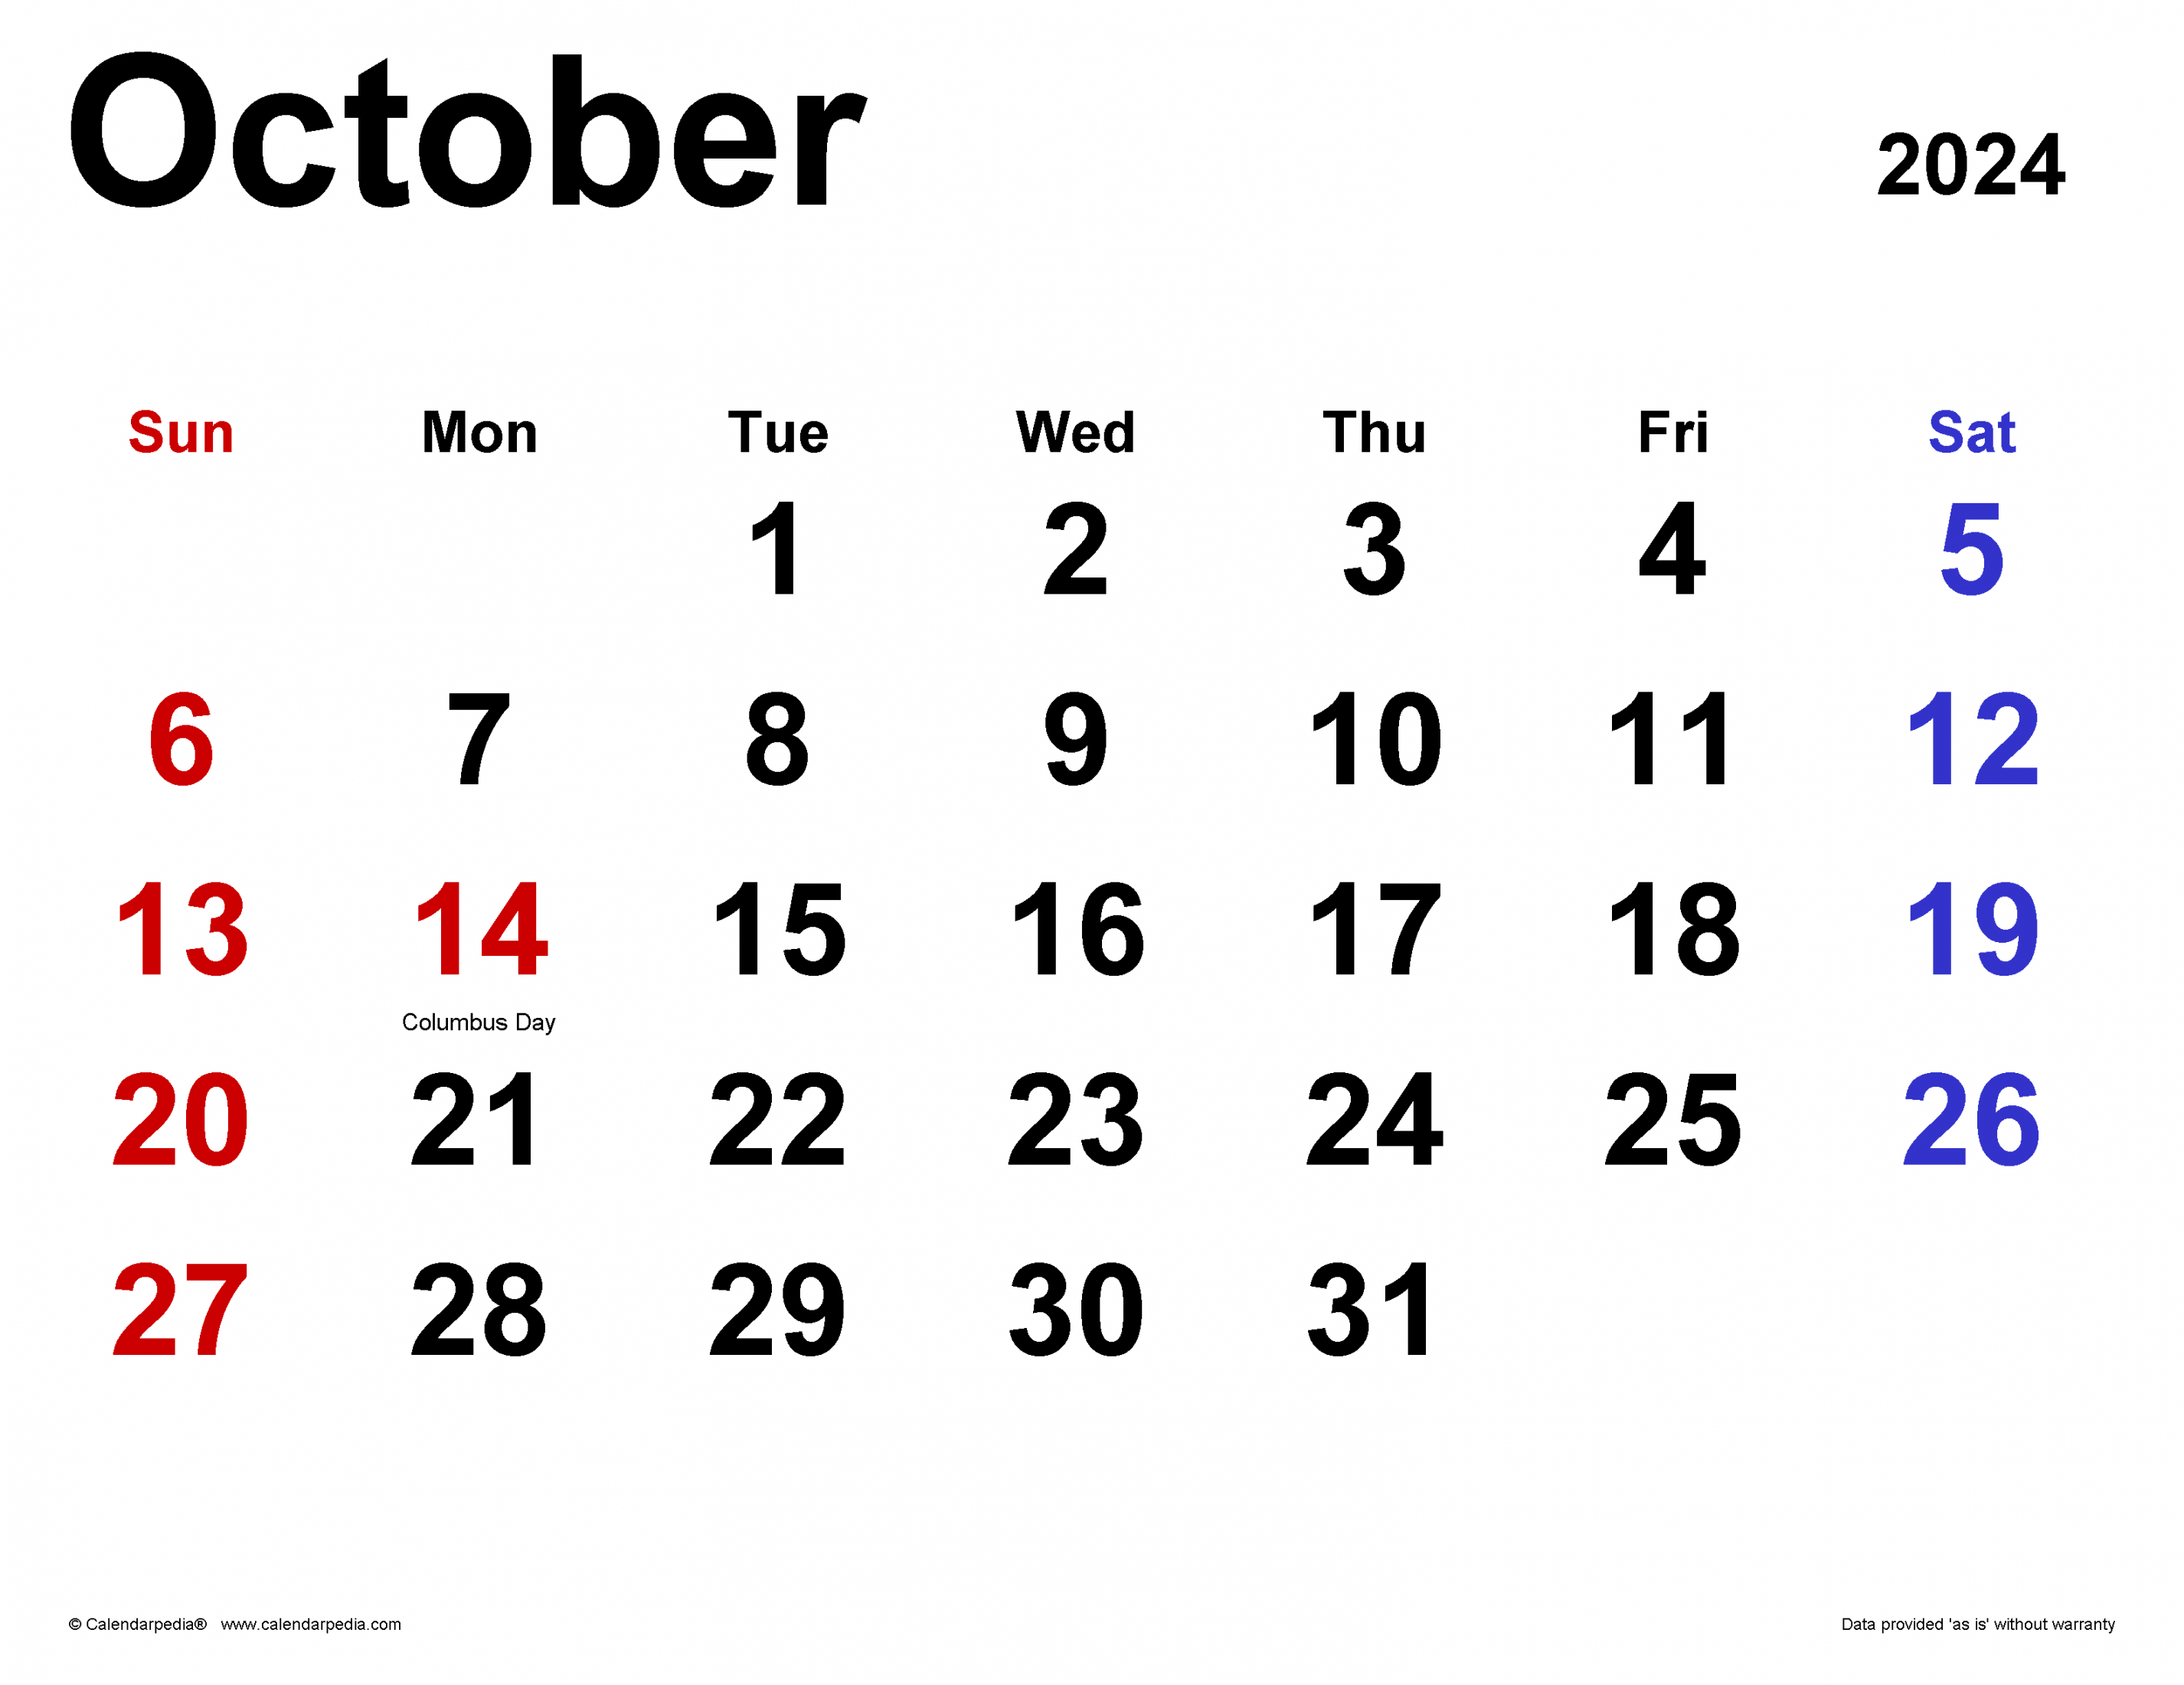 October Calendar Templates for Word, Excel and PDF